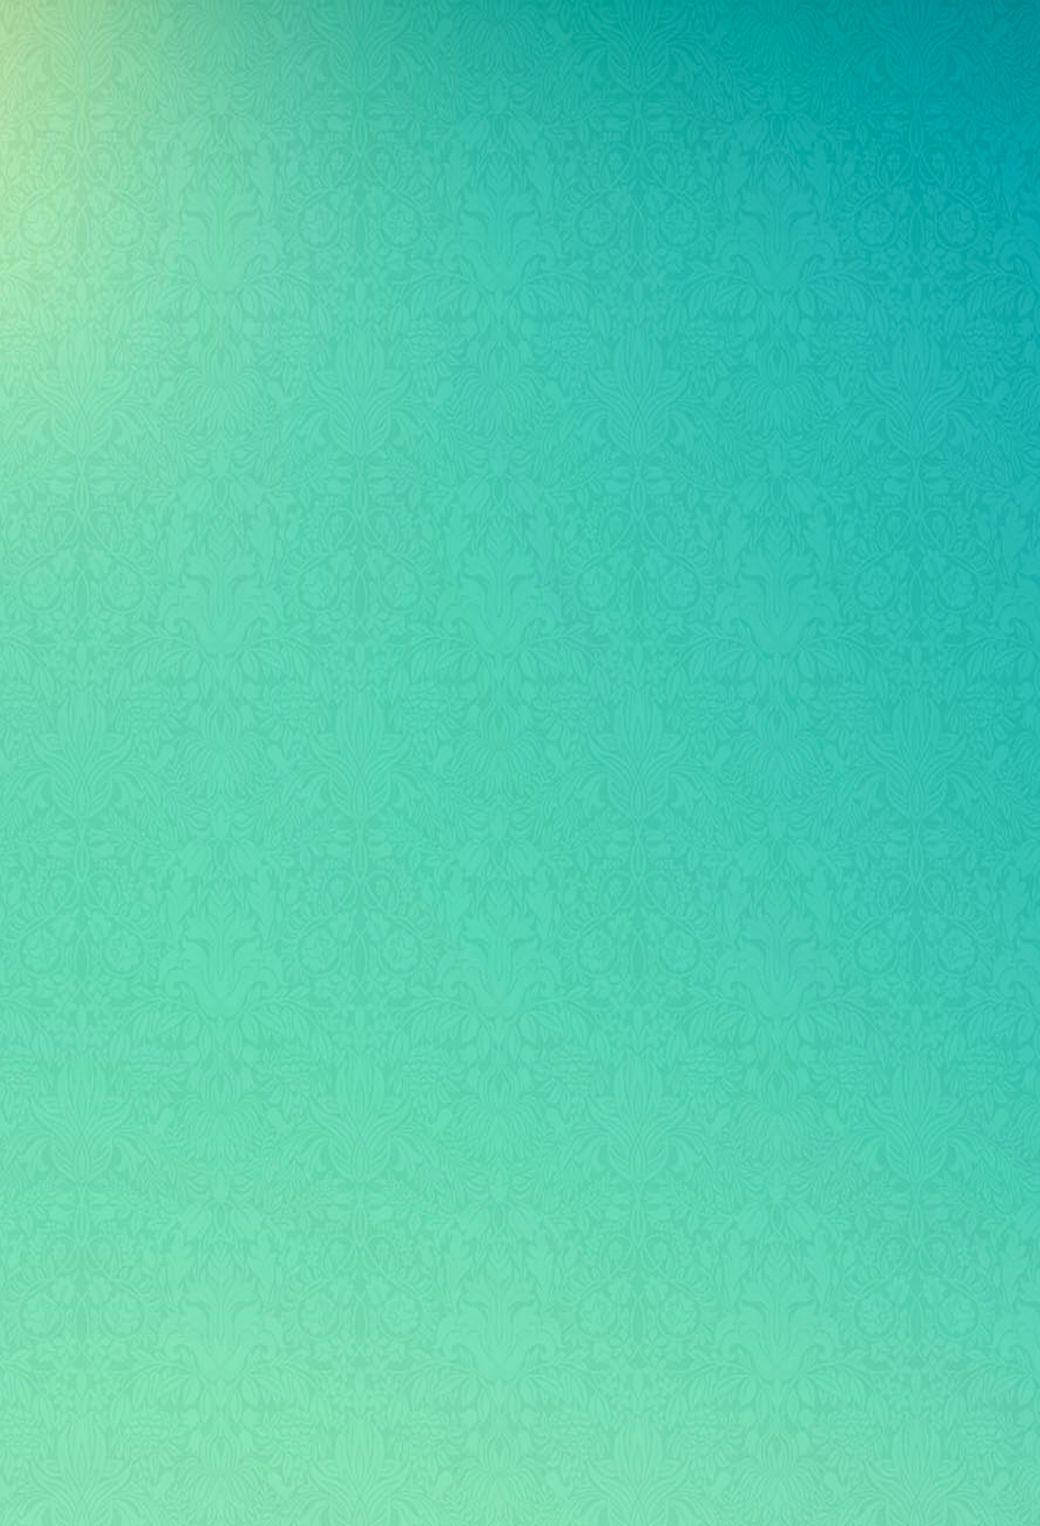 Teal Gradient Ios 7 Picture